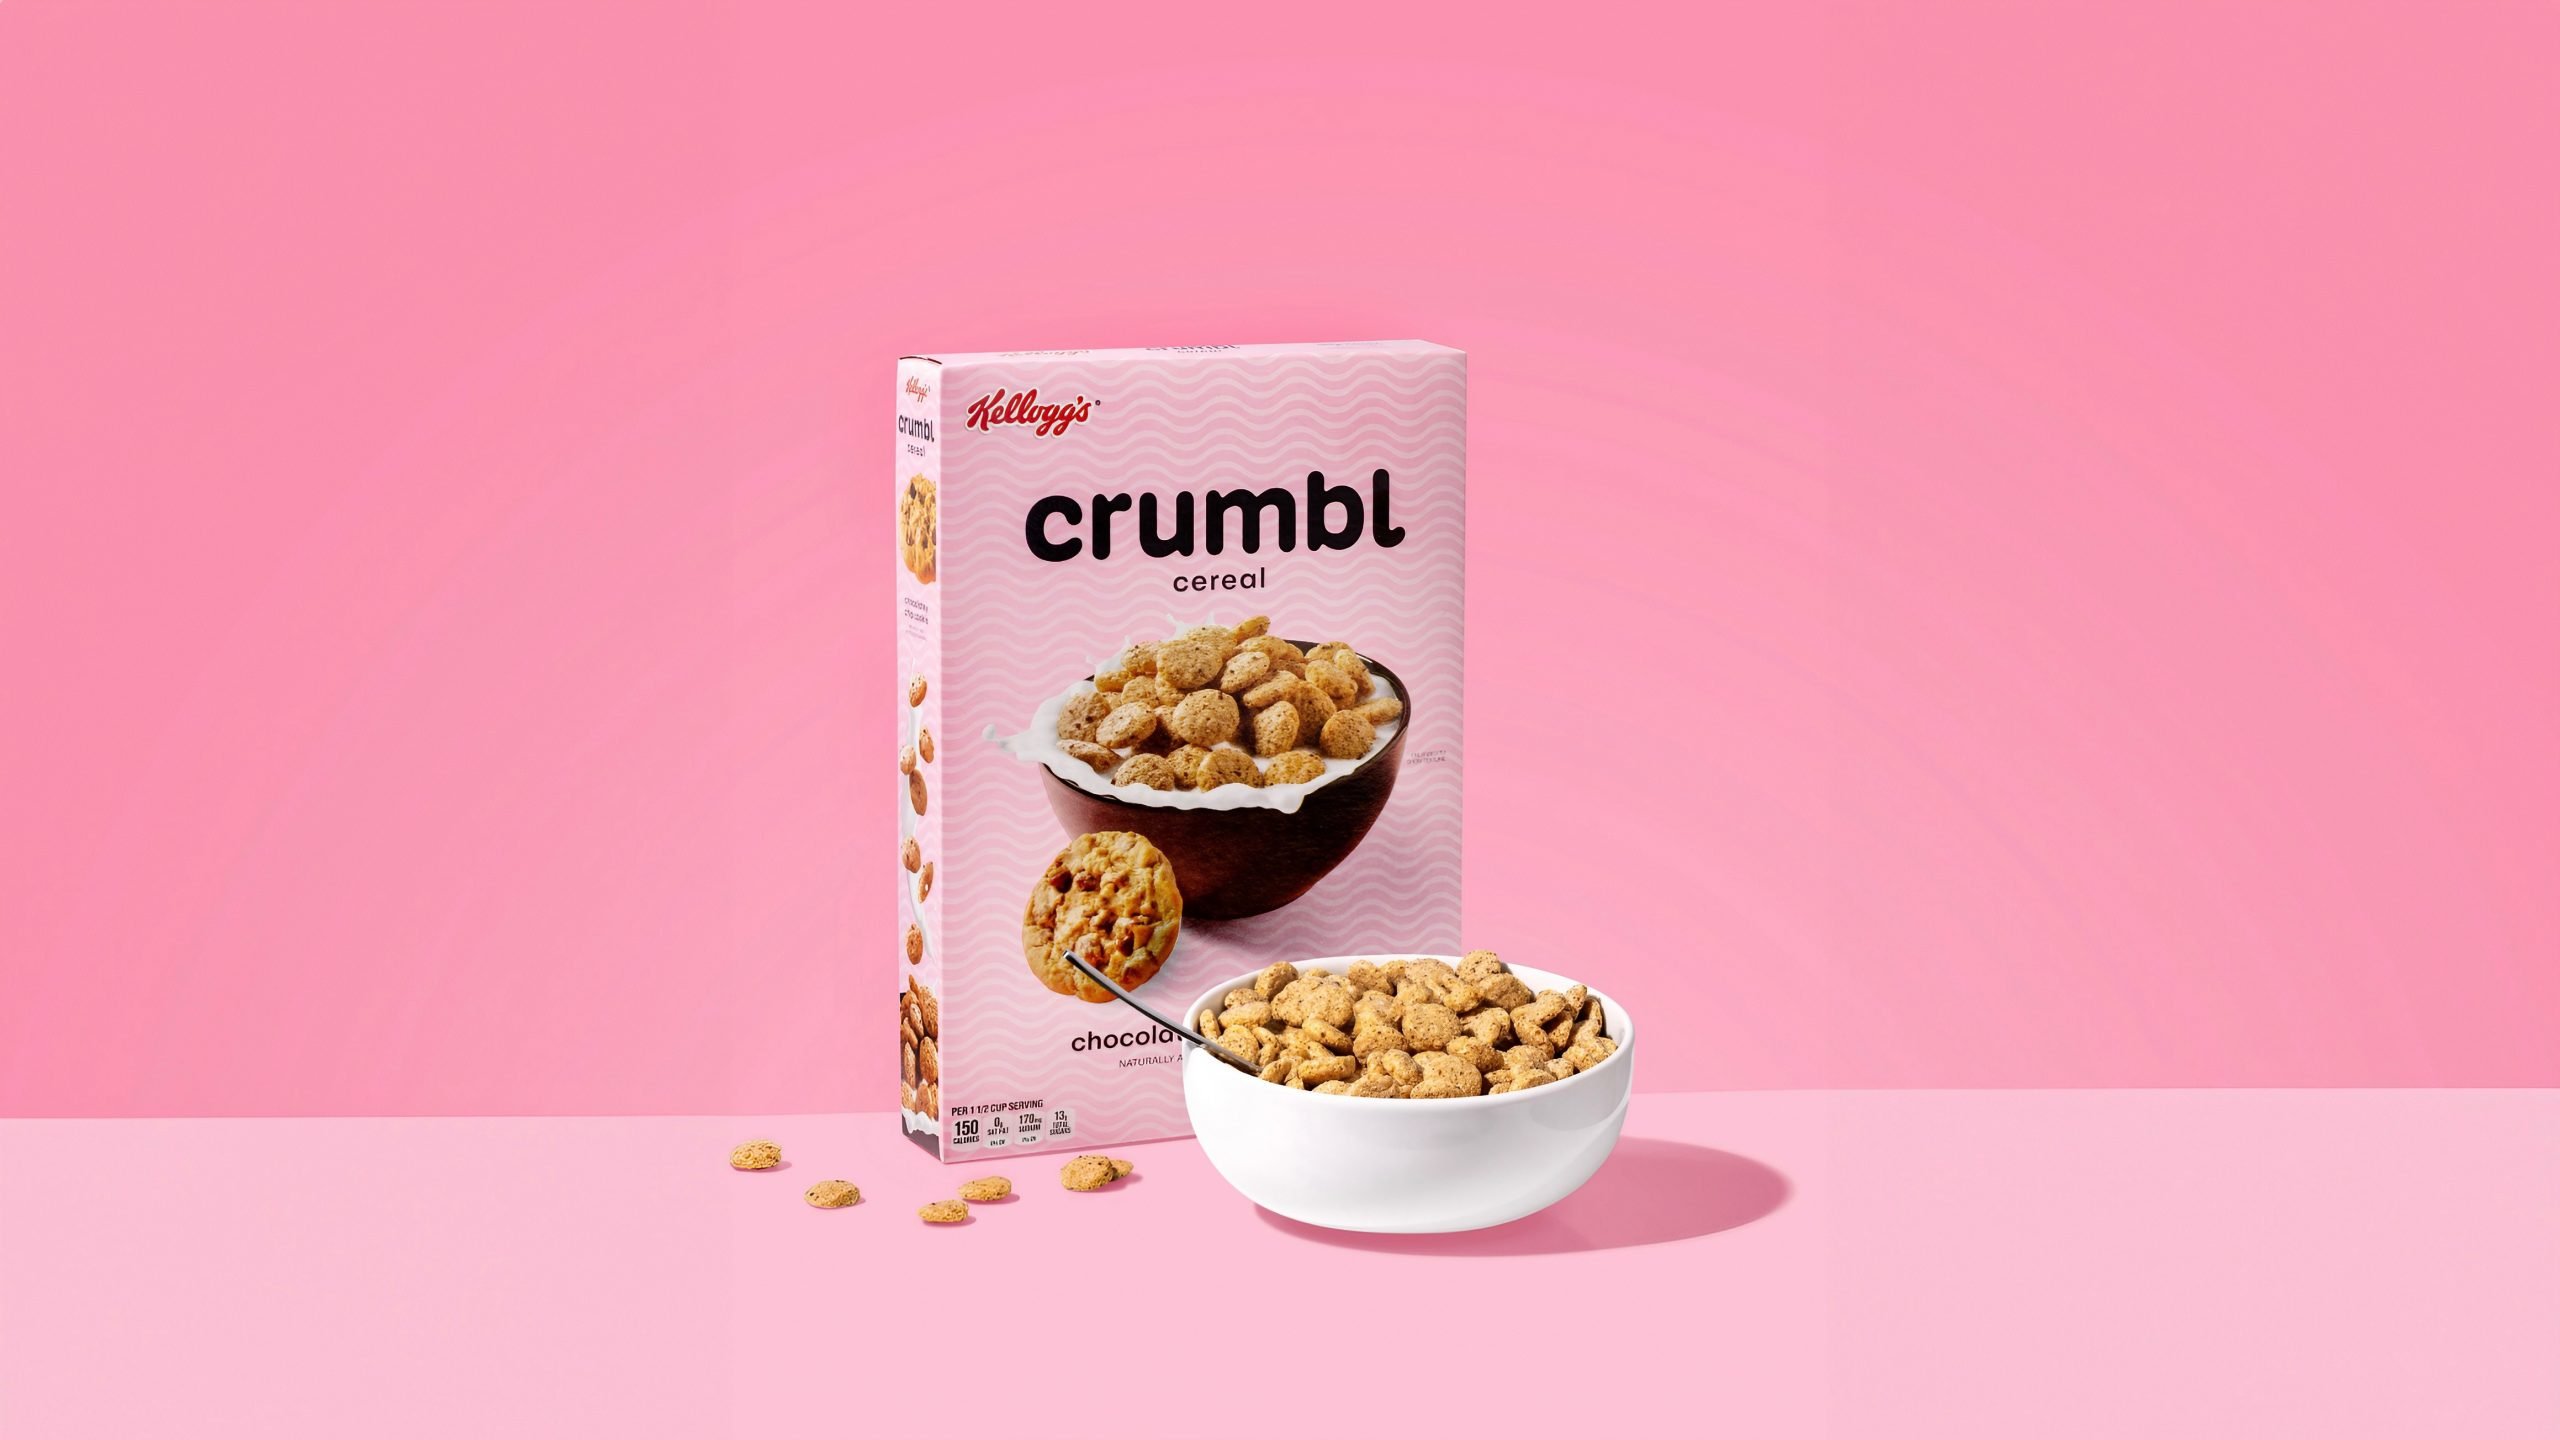 Is Kellogg’s New Crumbl Cereal the Cookie Crisp Dupe for Adults?